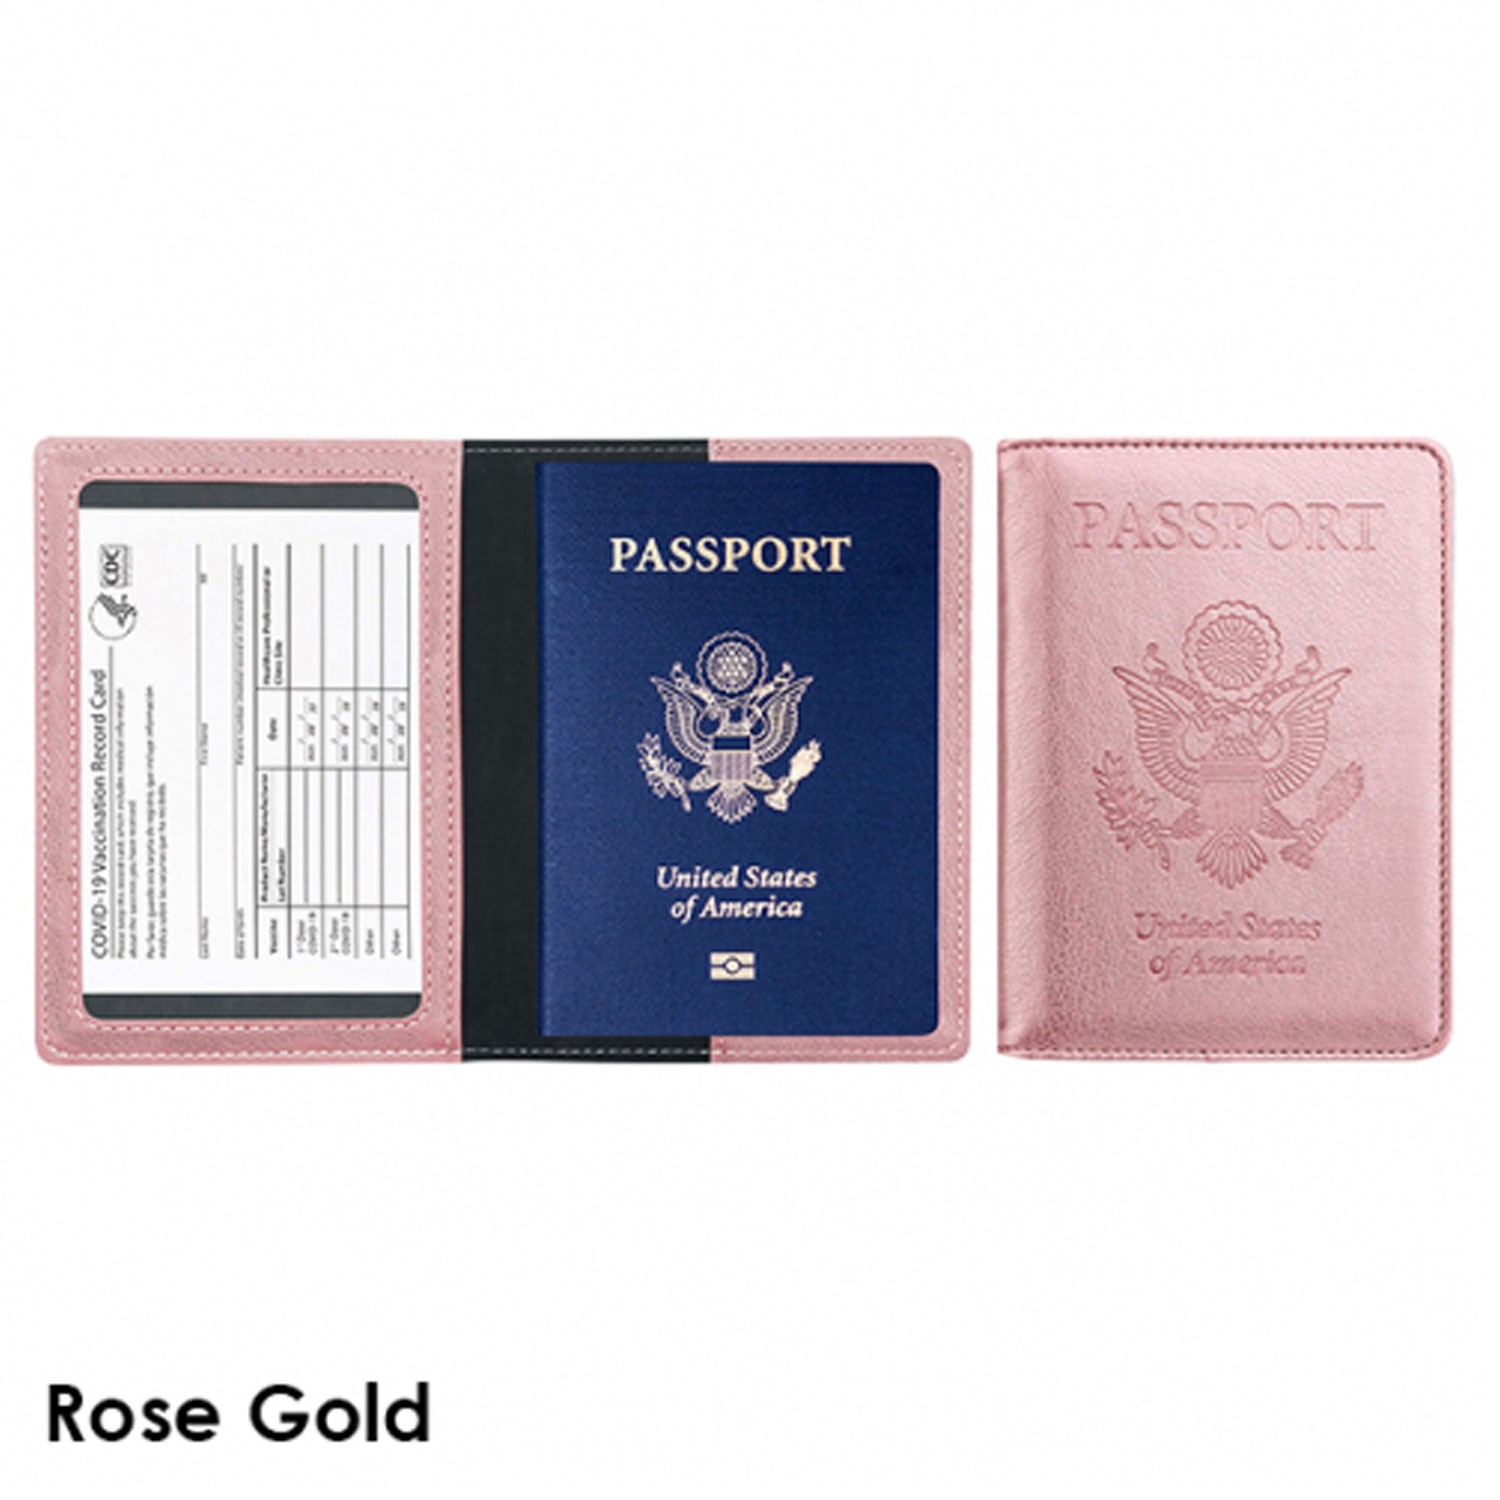 Passport Holder With CDC Vaccination Card Protector